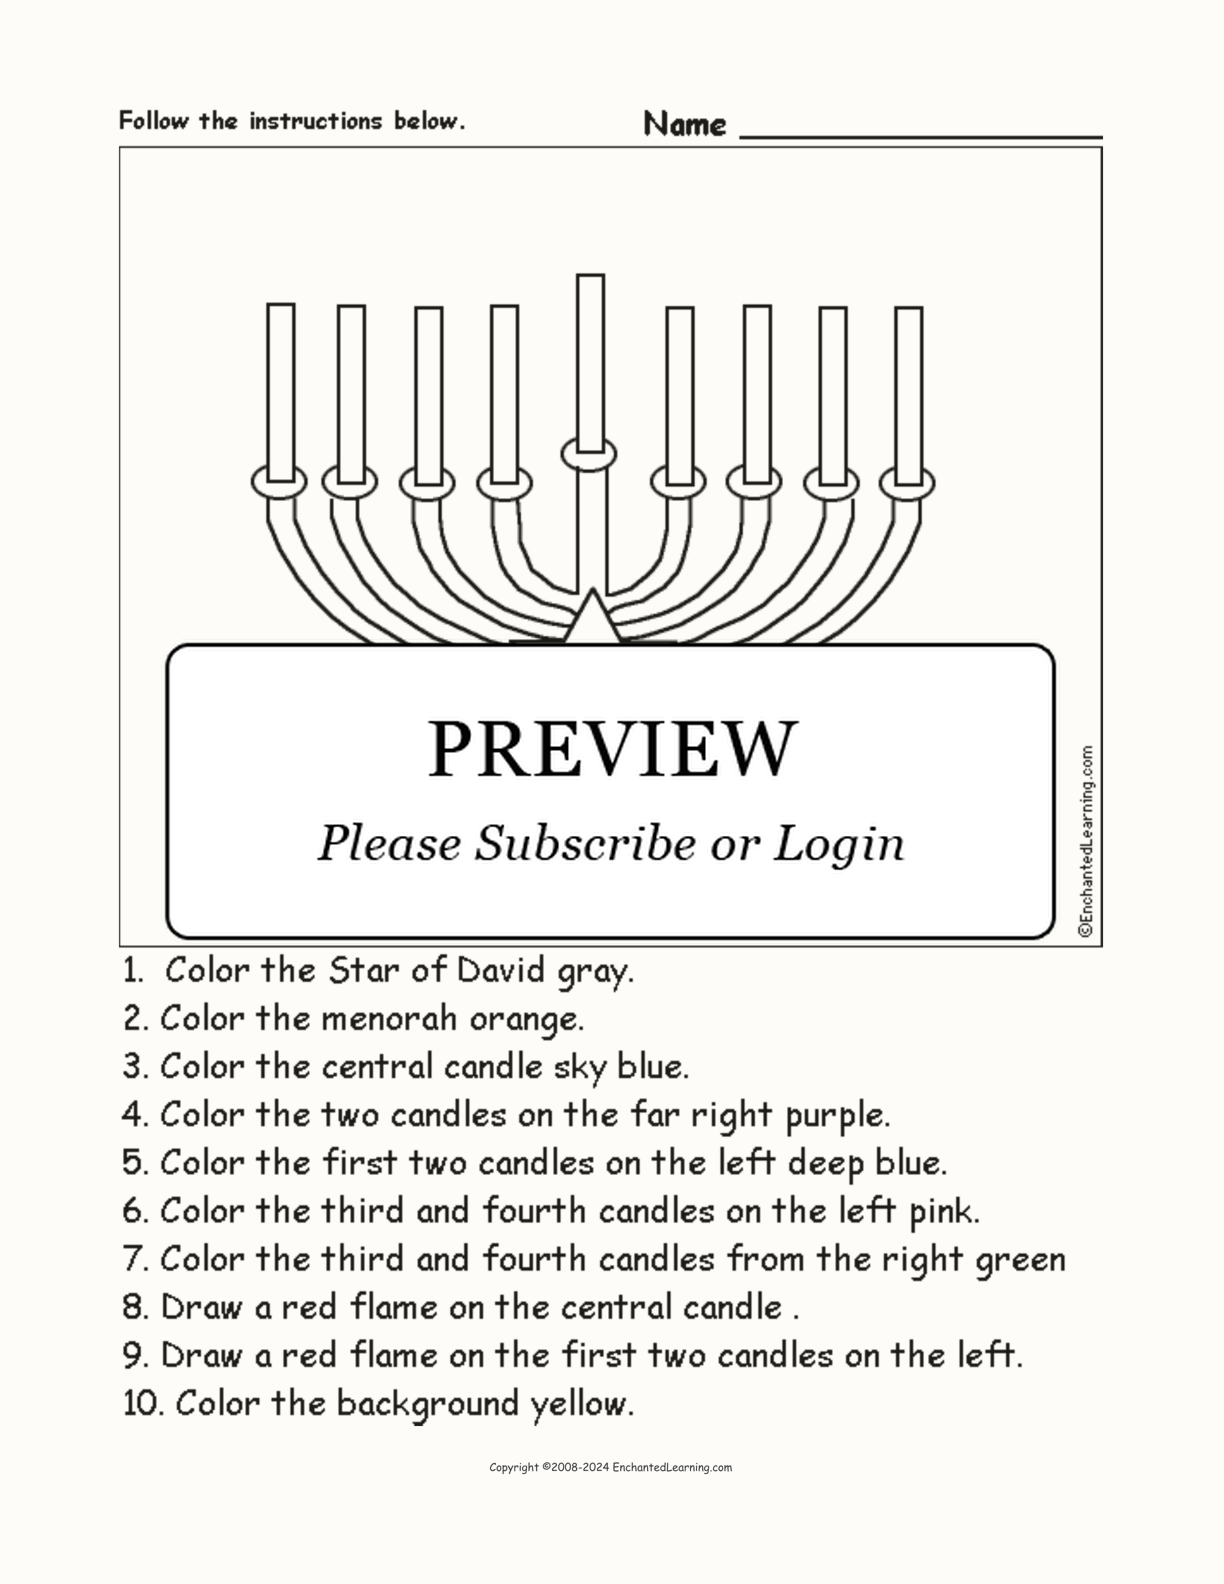 Menorah - Follow the Instructions interactive worksheet page 1